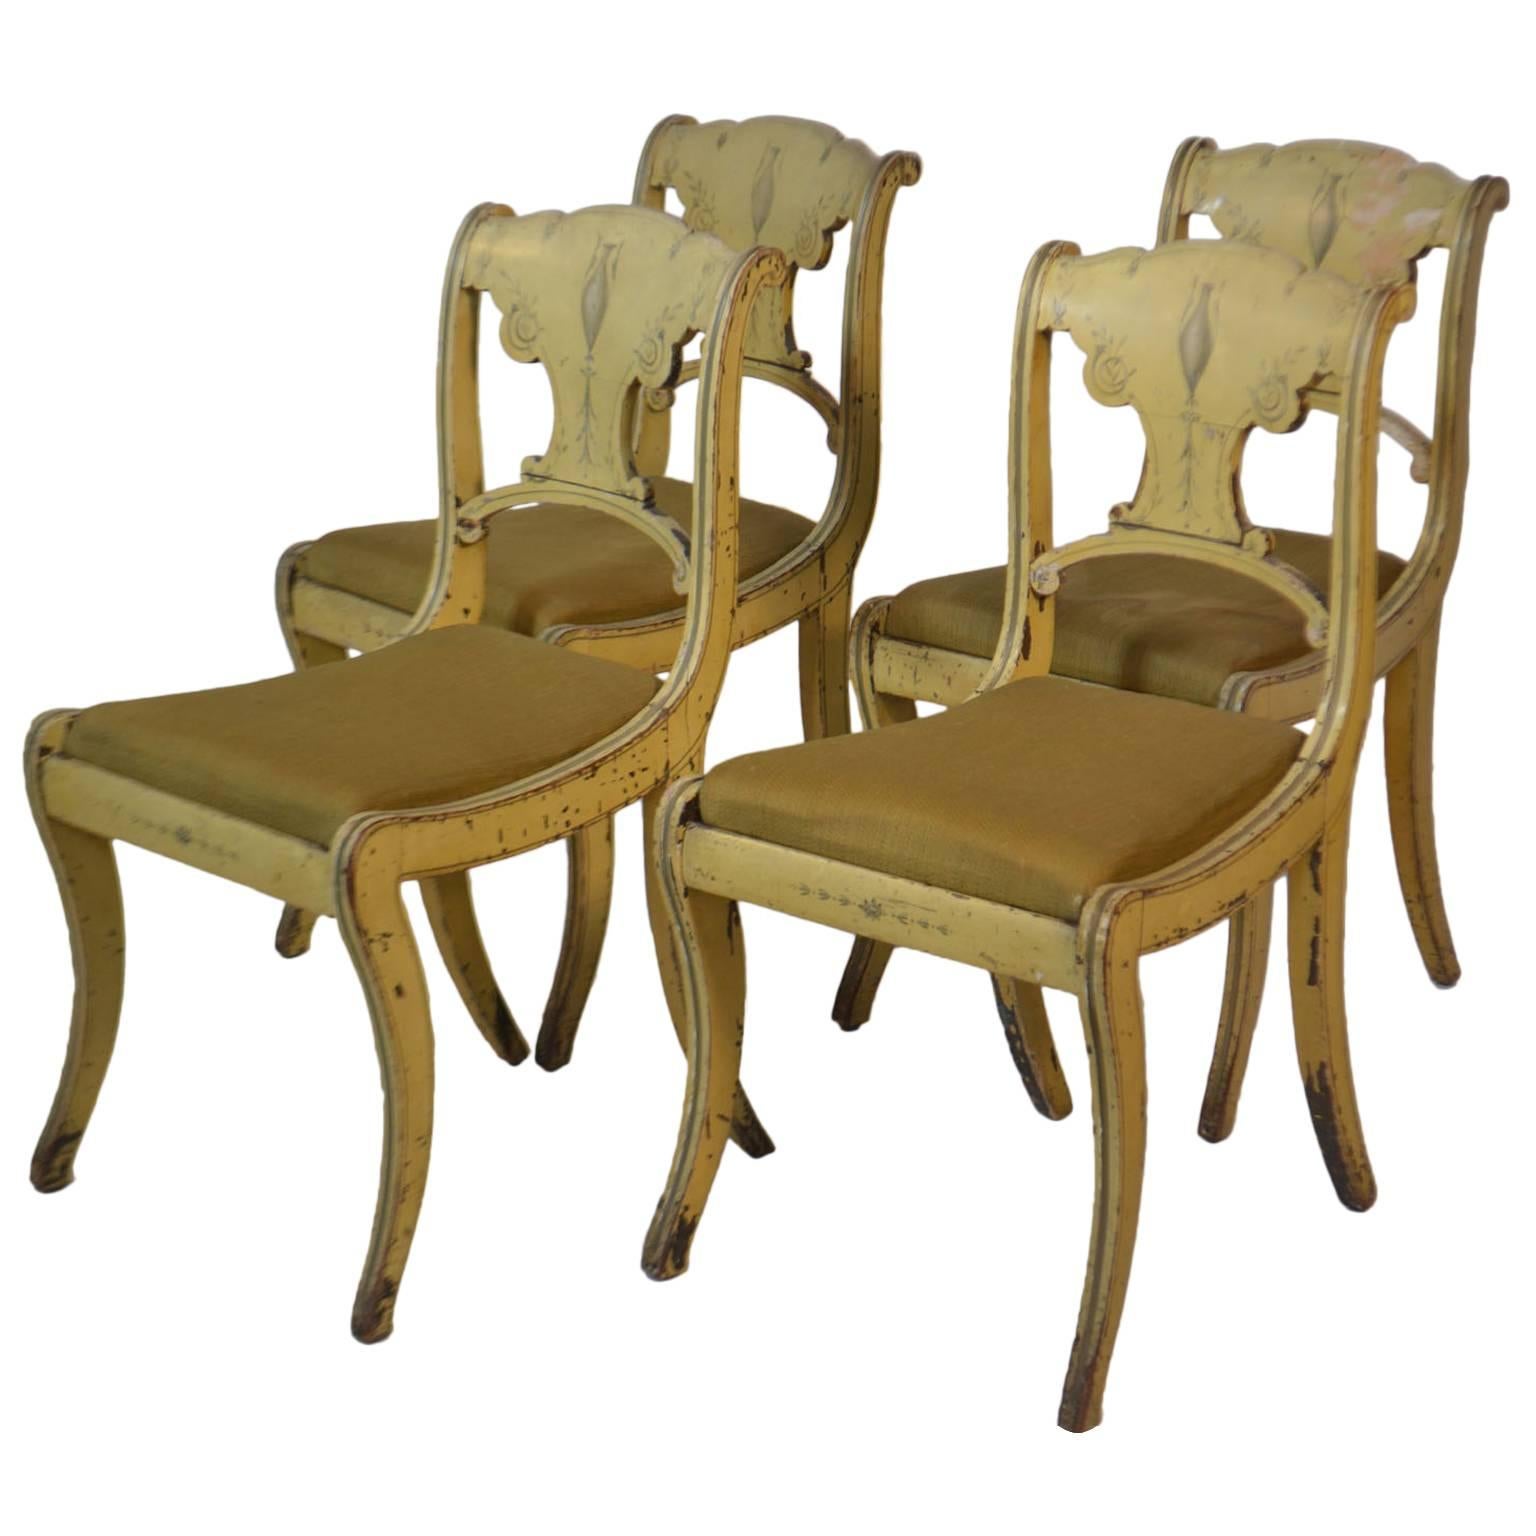 19th Century Set of Four English Small Painted Chairs